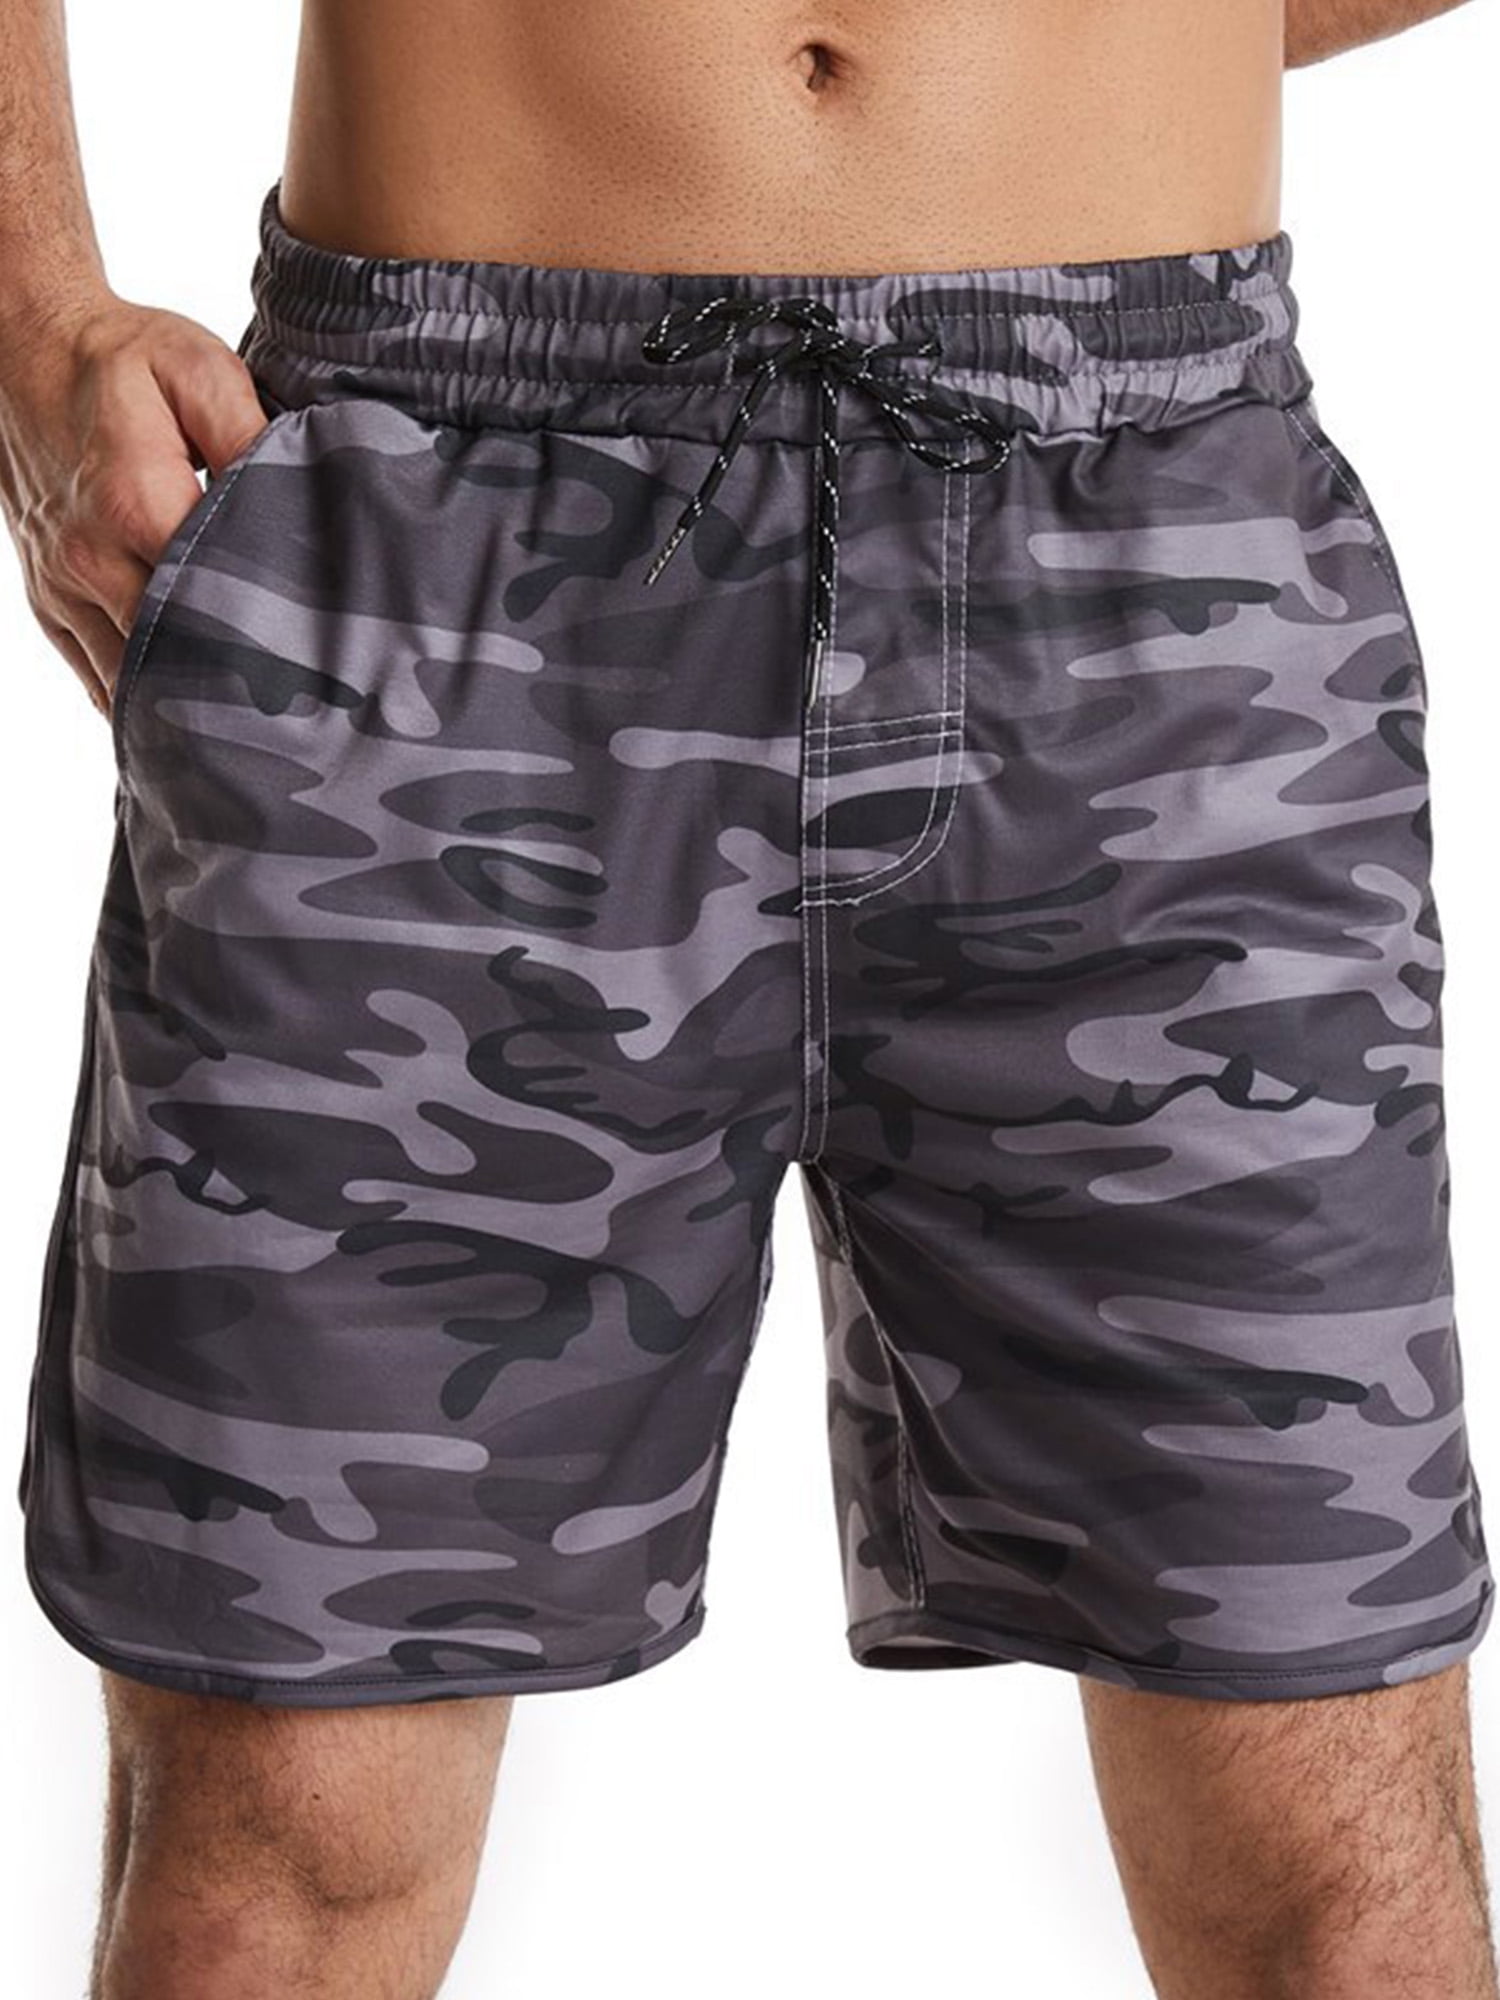 Mens Athletic Quick Classic Camouflage Army Green Graphic Swim Trunks Drawstring Lined Camo 